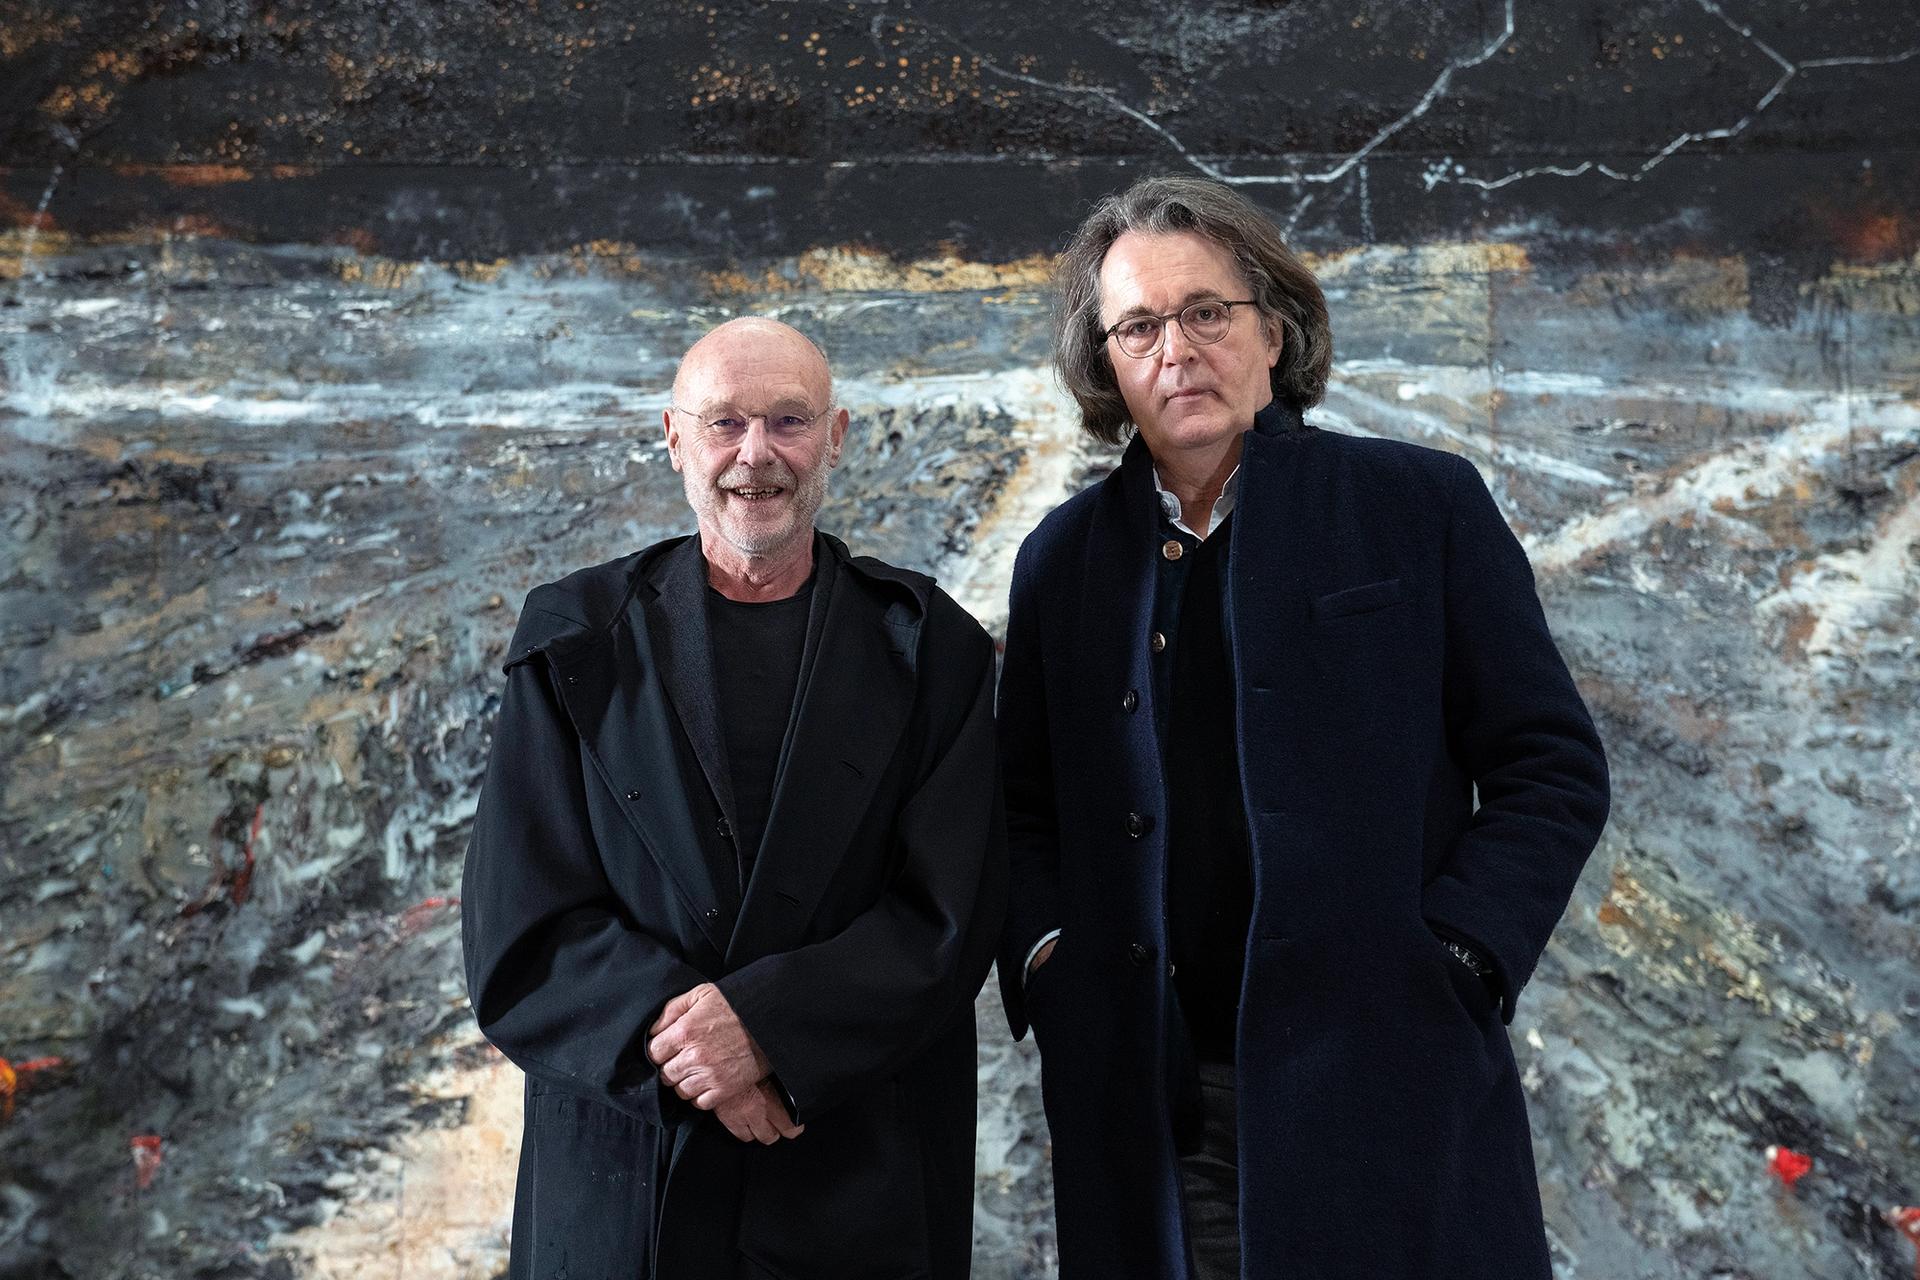 The artist Anselm Kiefer (left) and the French composer Pascal Dusapin have both been commissioned to make works for the Pantheon Photo: D. Plowy/Panthéon/CMN